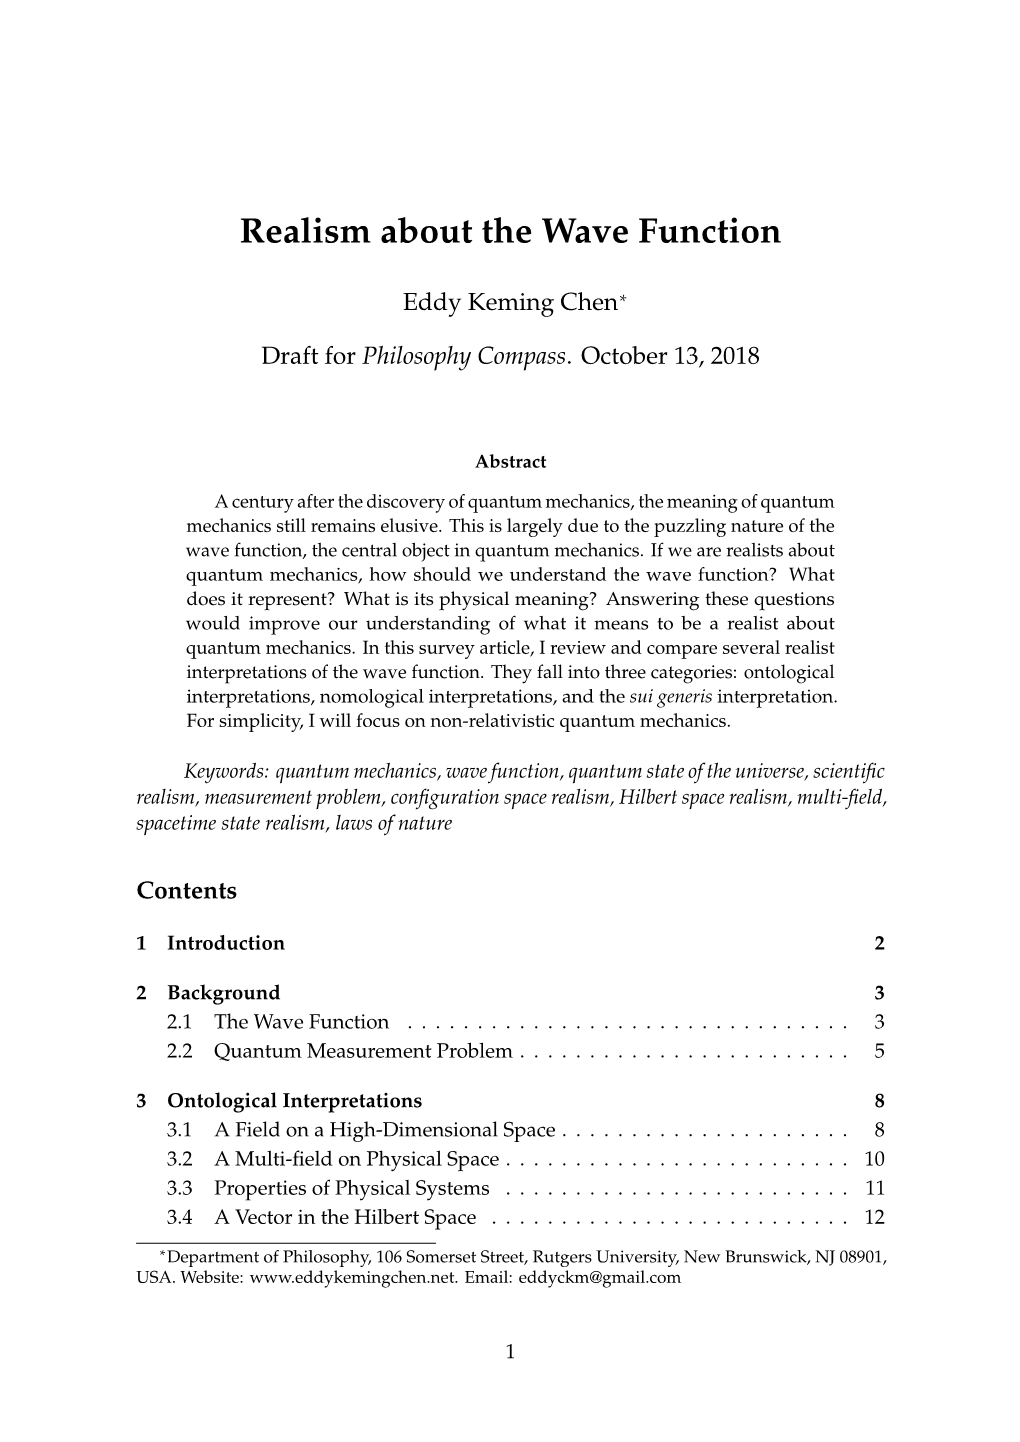 Realism About the Wave Function